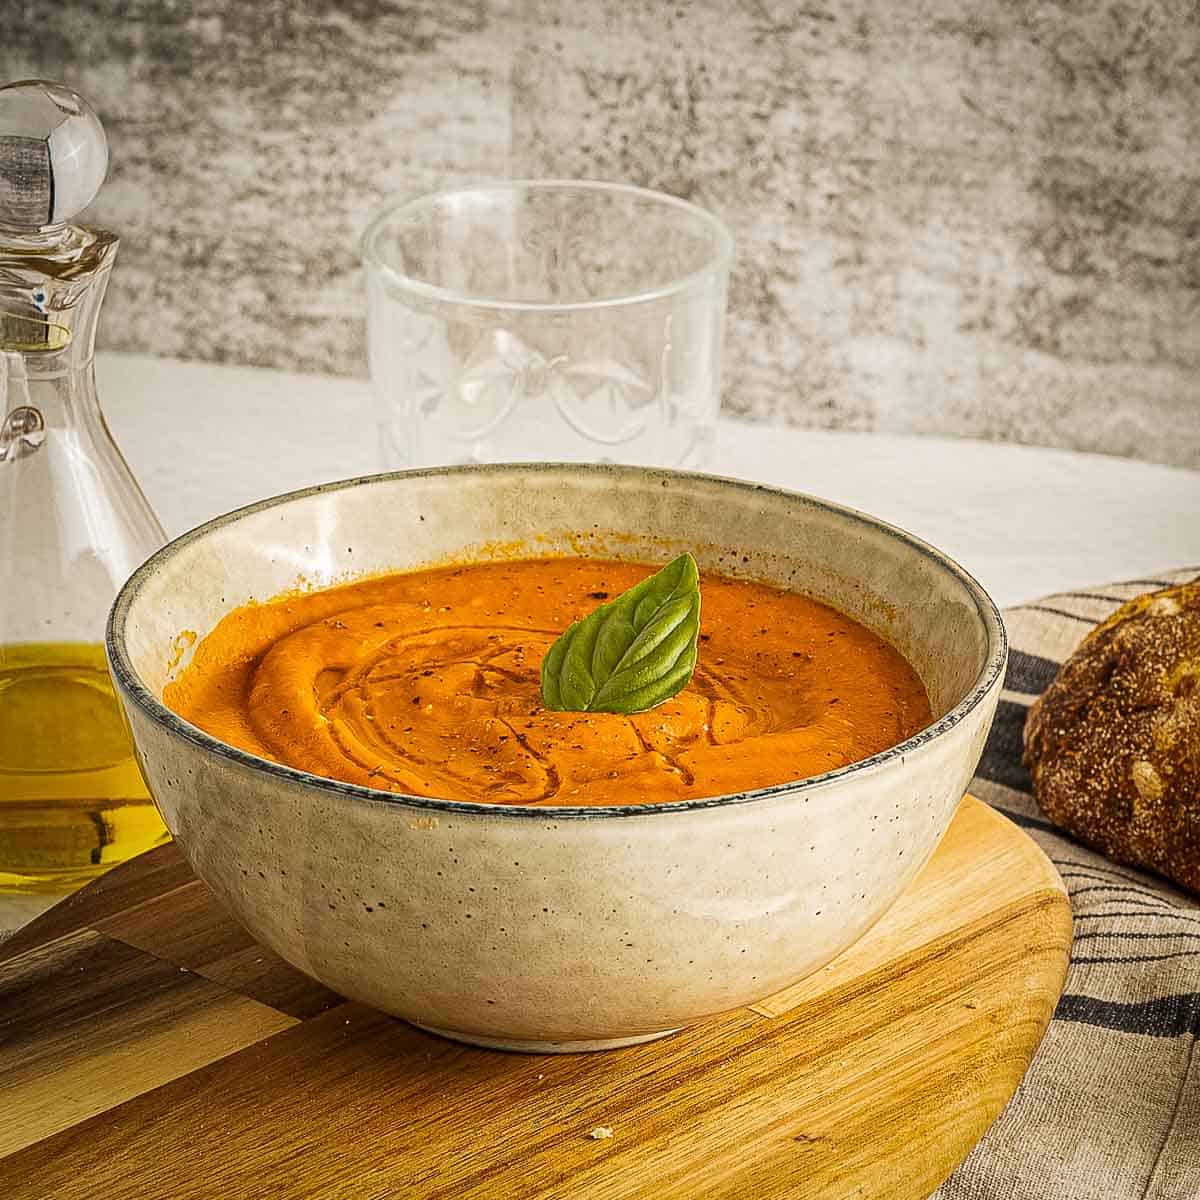 Side shot of tomato carrot soup in a tan bowl on a cutting board with a glass jar of olive oil, a drinking glass, and a loaf of bread in the background.